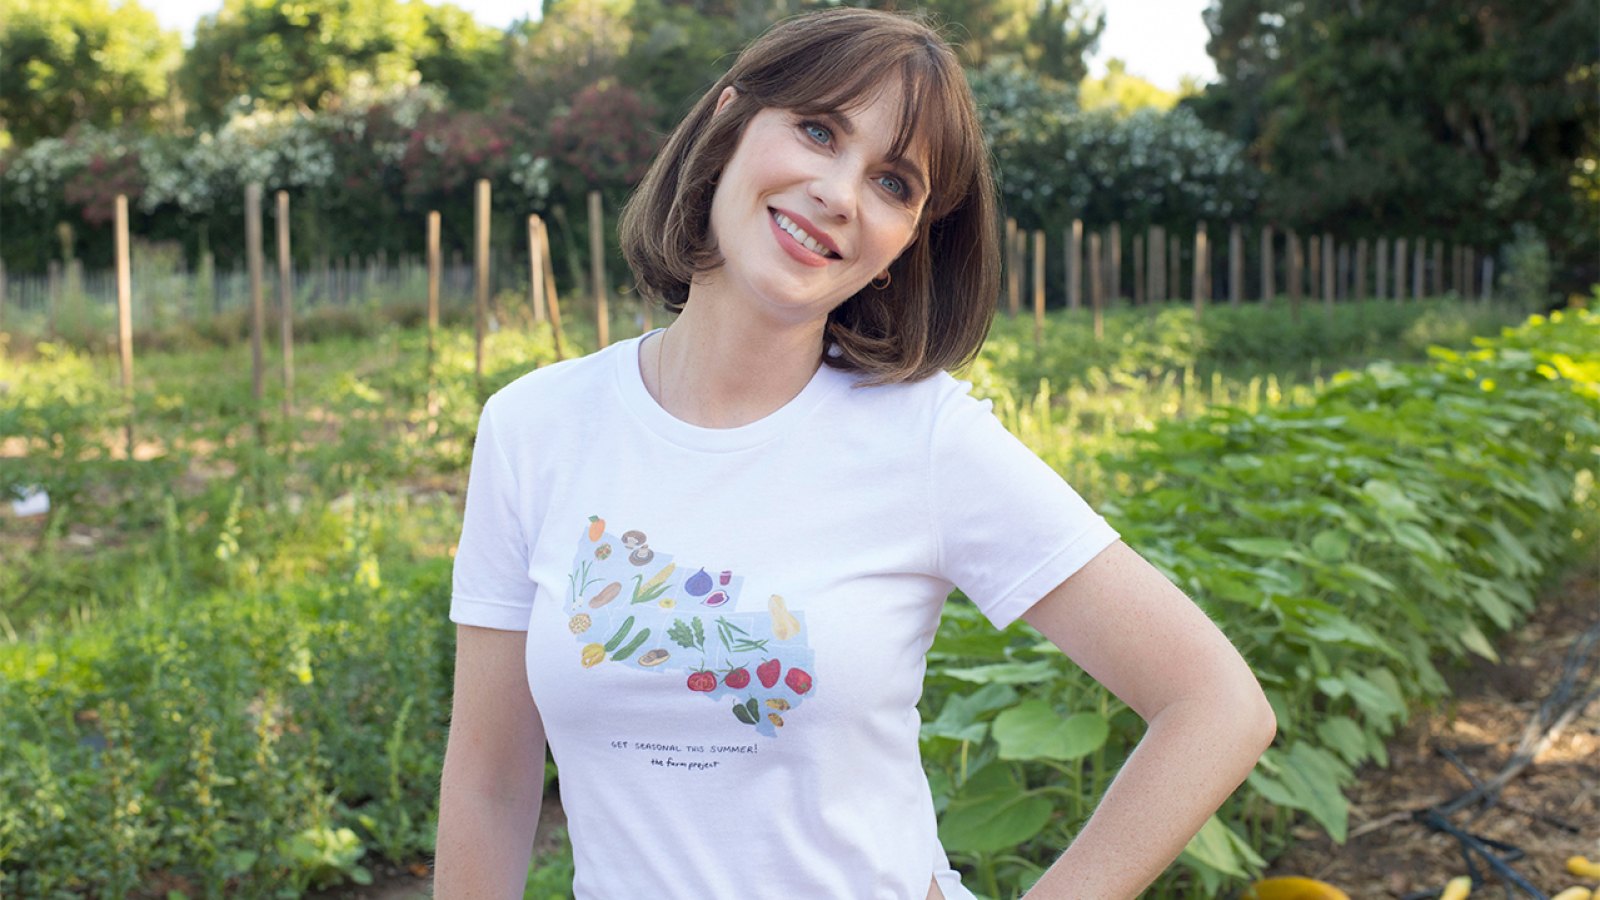 Deschanel (in Malibu on July 24) and her husband launched an ATTN series, Your Food's Roots, which explores food origins.